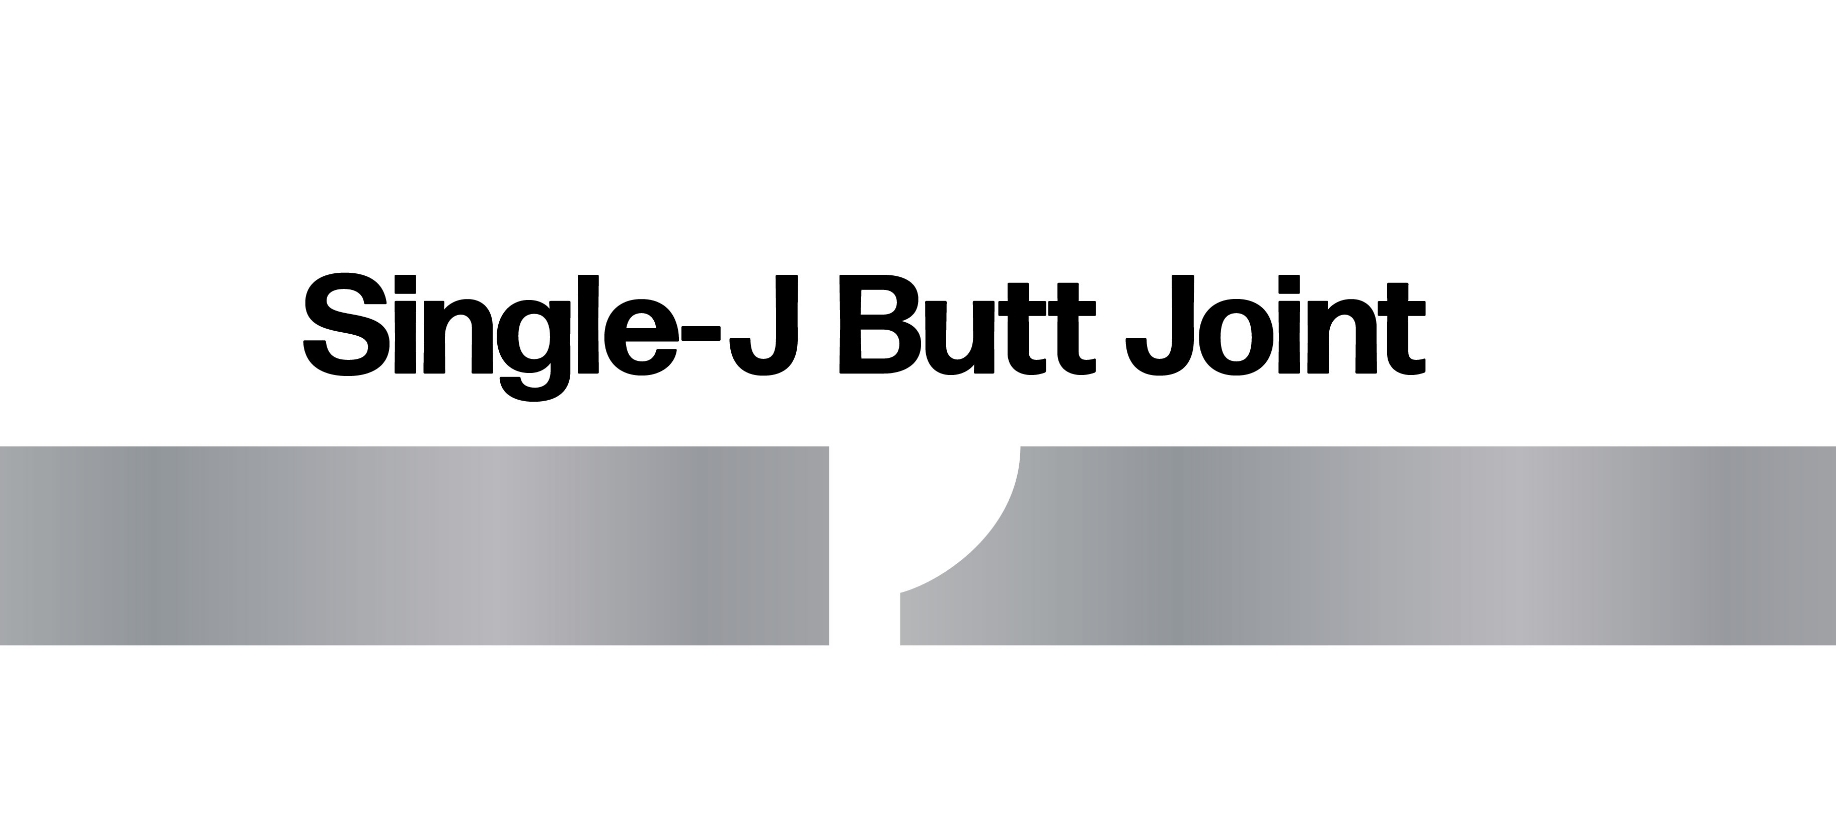 Single J Butt Joint Graphic